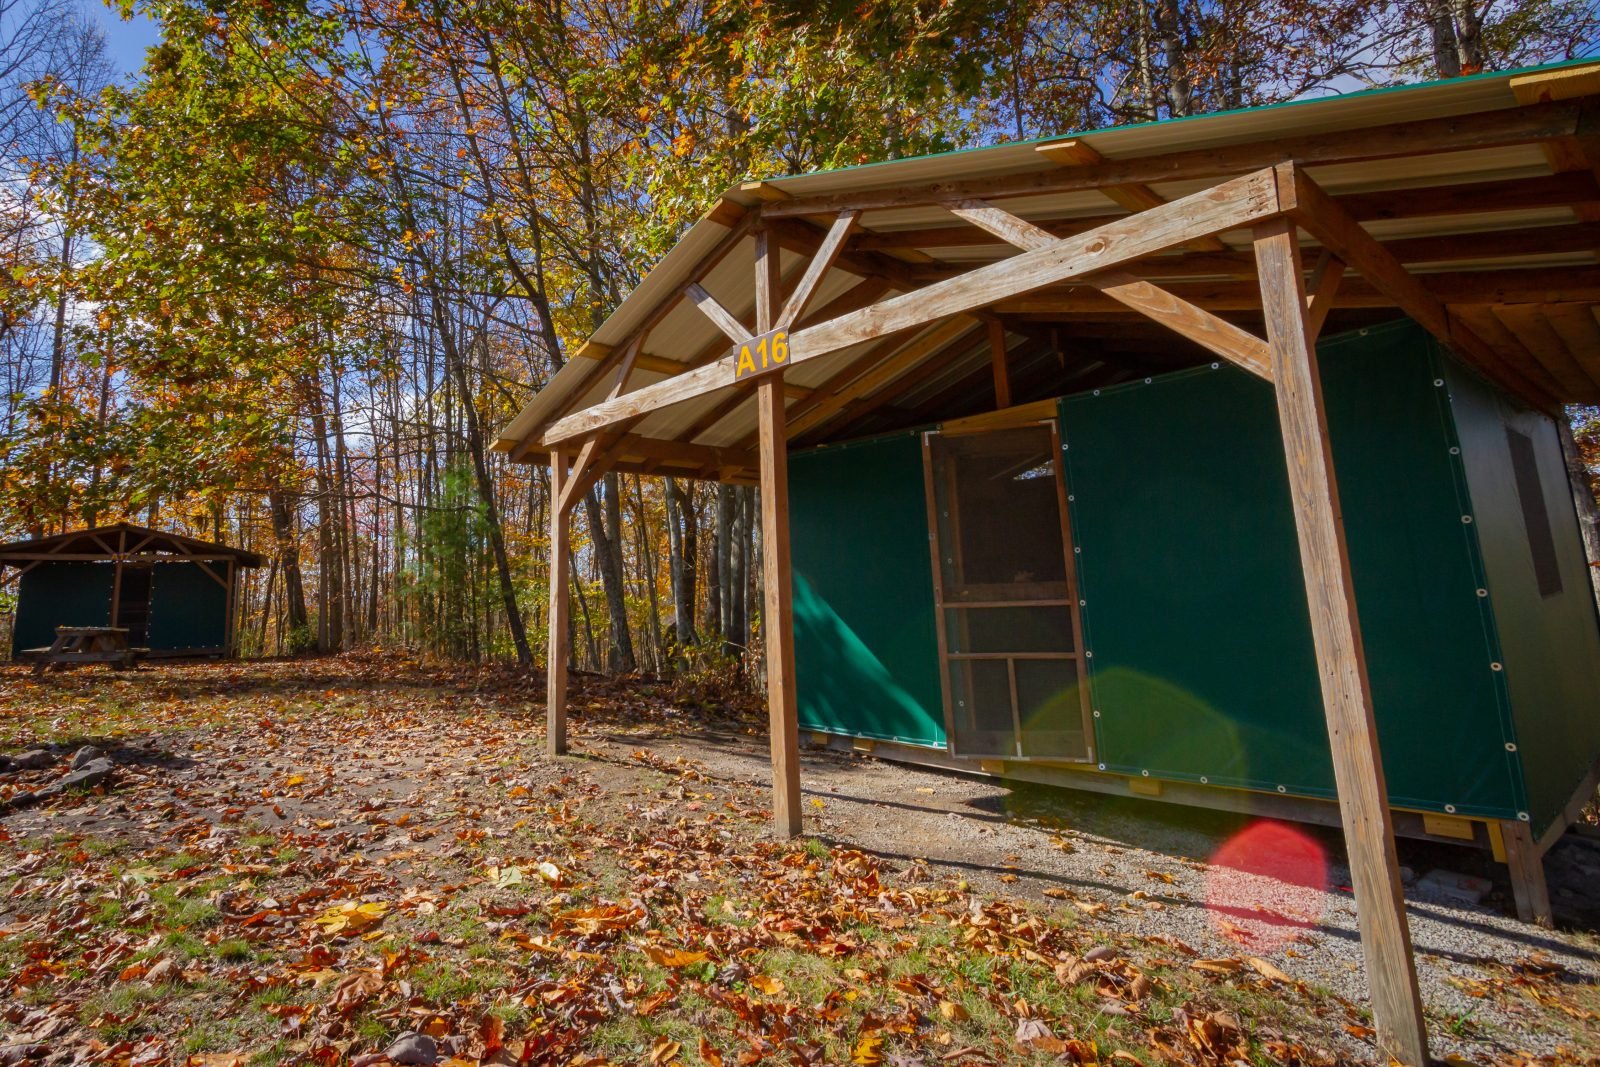 An outside view of ACE's new river gorge rustic lodging platform tent rental.